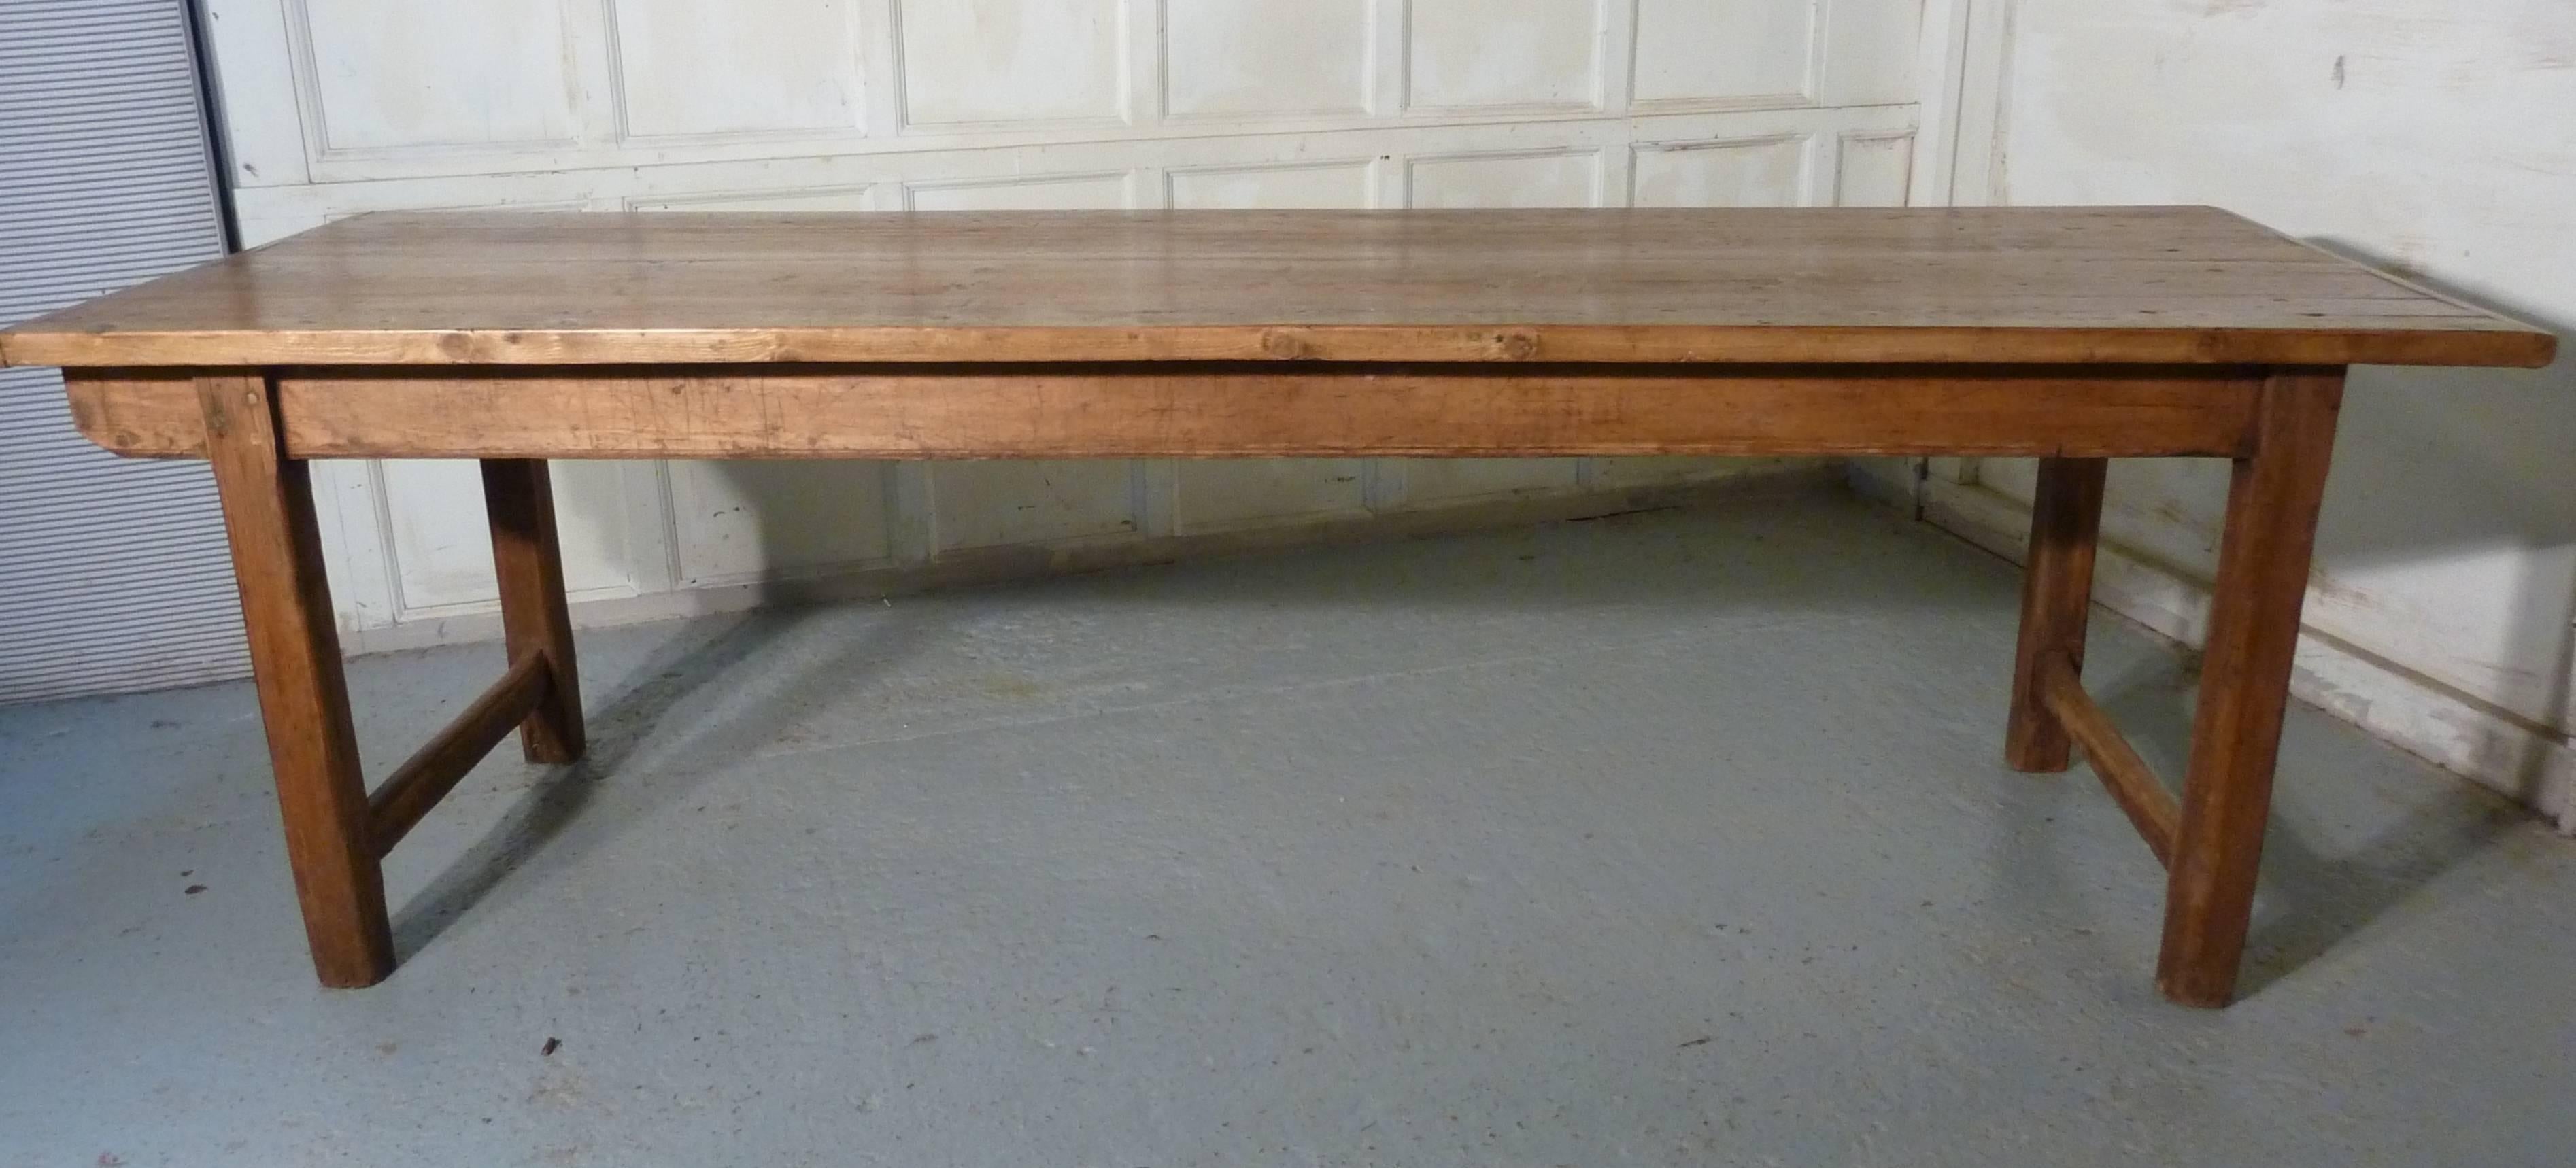 Hand-Crafted Large 19th Century French Rustic Pine Table, Cleated 2 Plank Farmhouse Top